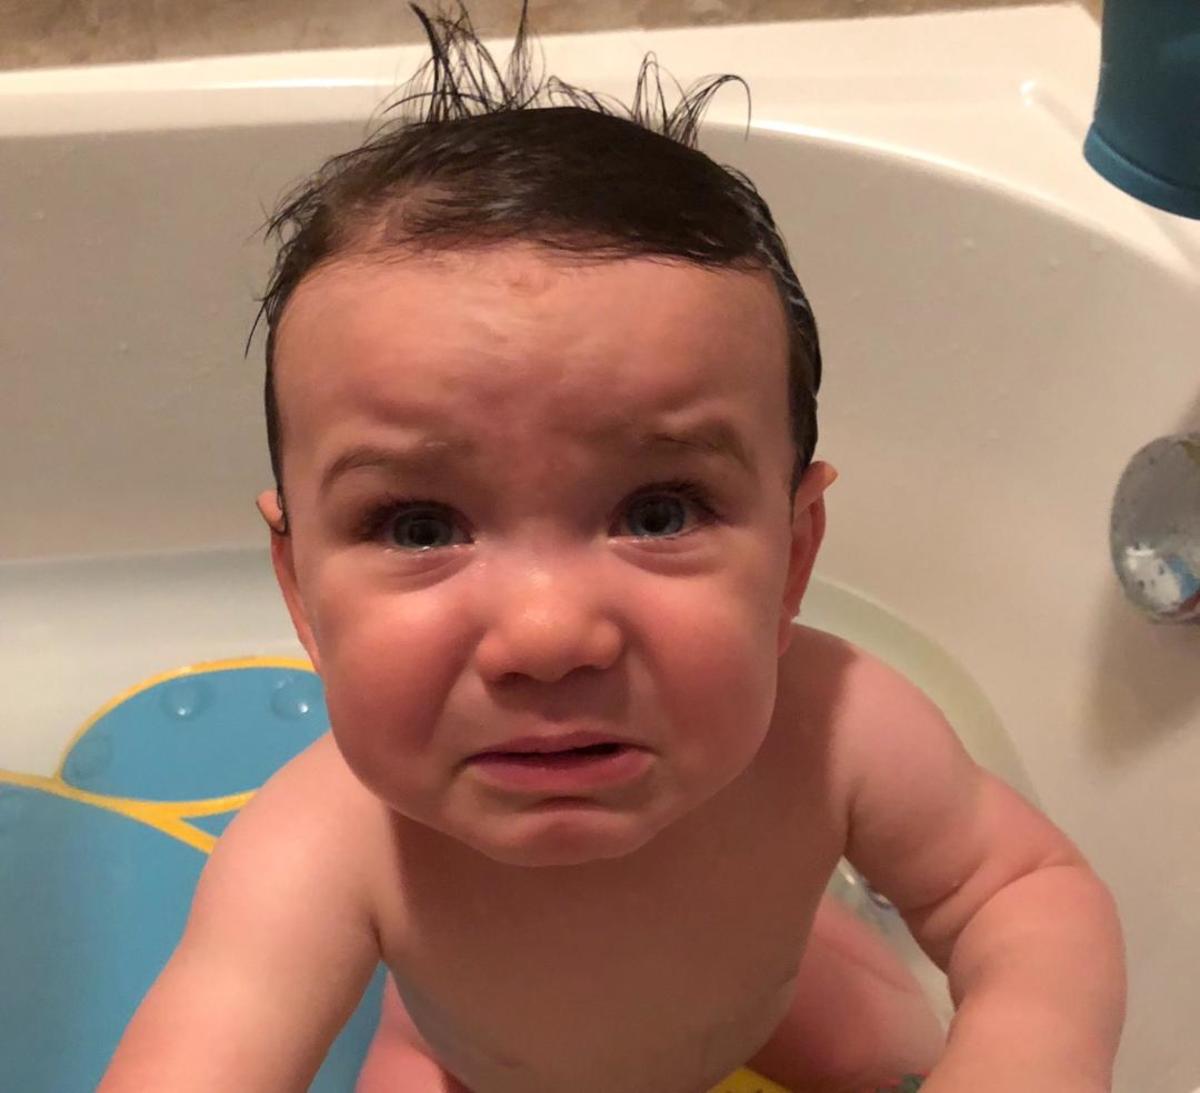 My poor guy wasn't feeling to good this day and just wanted out of the bath.